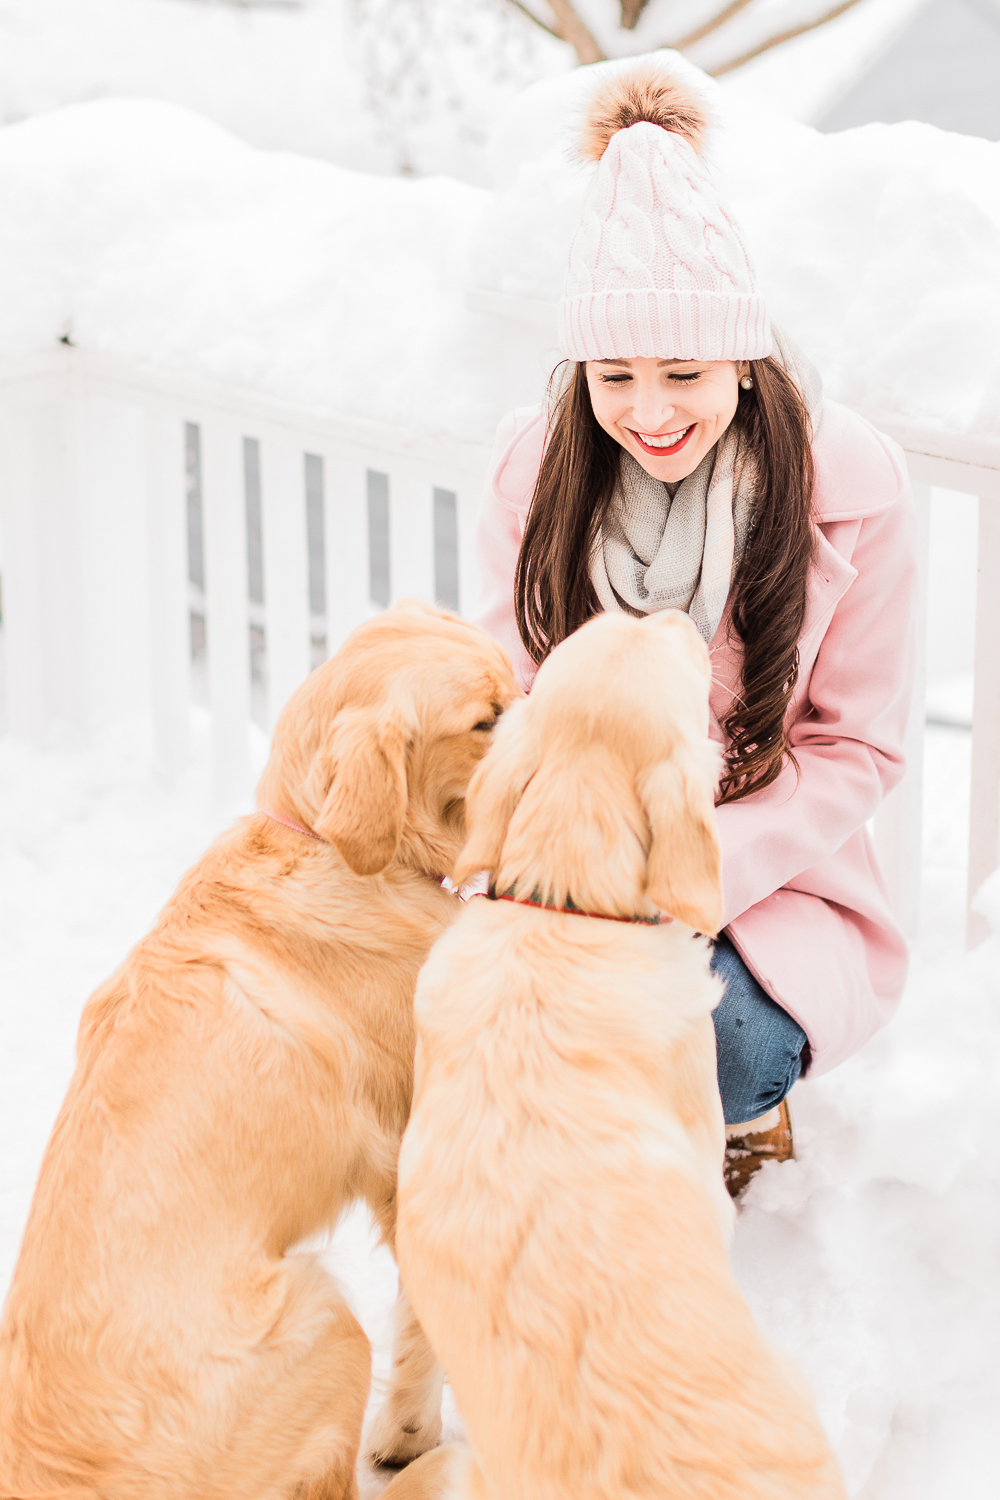 5 Easy Ways to Save on Pet Supplies and Affordable Quality Dog Food by the popular affordable fashion and southern lifestyle blog Diary of a Debutante by Stephanie Ziajka, best cheap dry dog food, Purina One Smartblend Lamb and Rice Formula at Sam's Club, best dog food at Sam's Club, cute golden retriever puppies in snow, cute golden retrievers in the snow